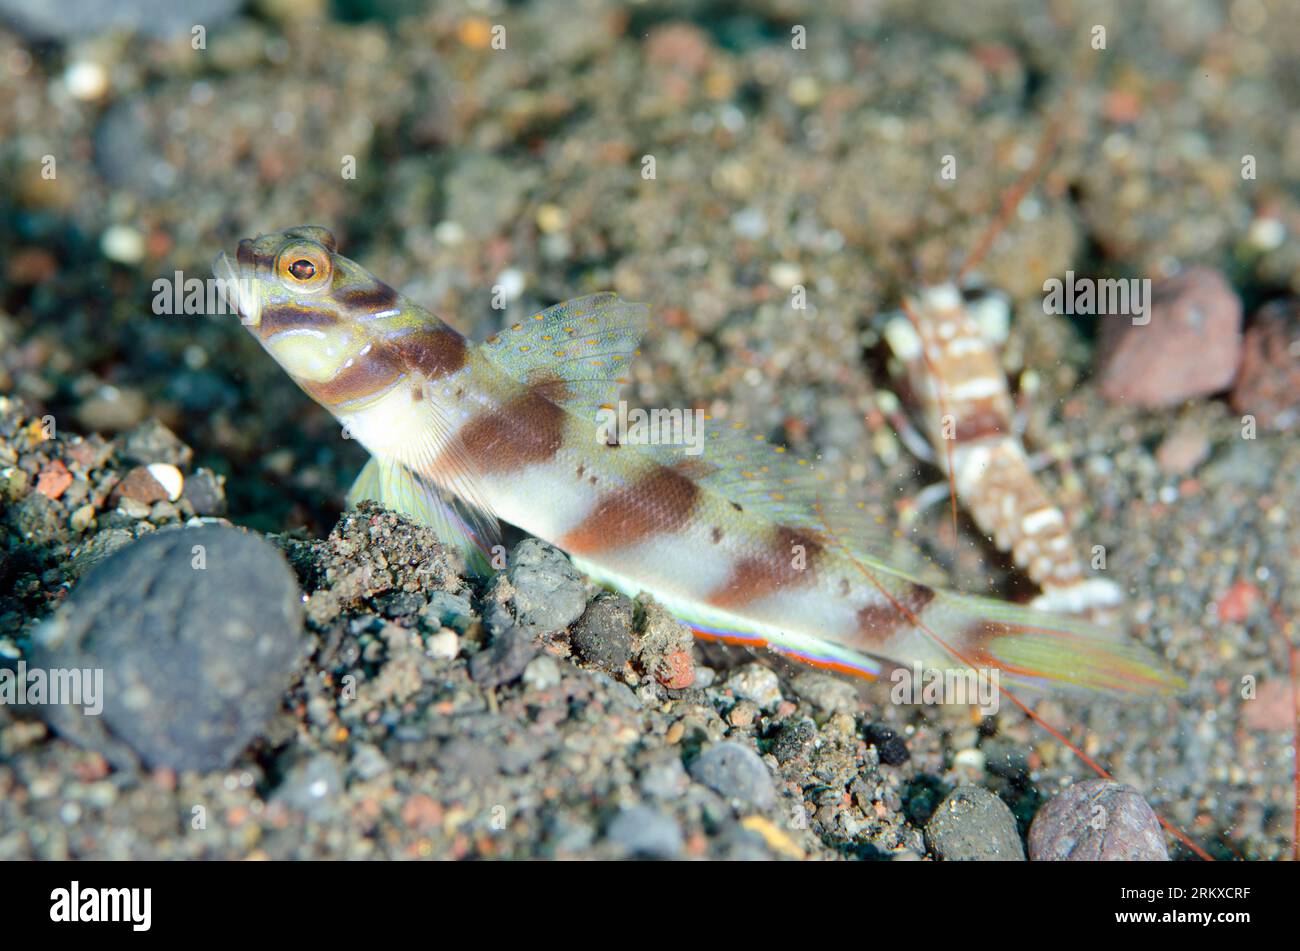 Slantbar Shrimpgoby, Amblyeleotris diagonalis, with Tiger Snapping Shrimp, Alpheus bellulus, cleaning hole entrance on sand, Ghost Bay dive site, Amed Stock Photo